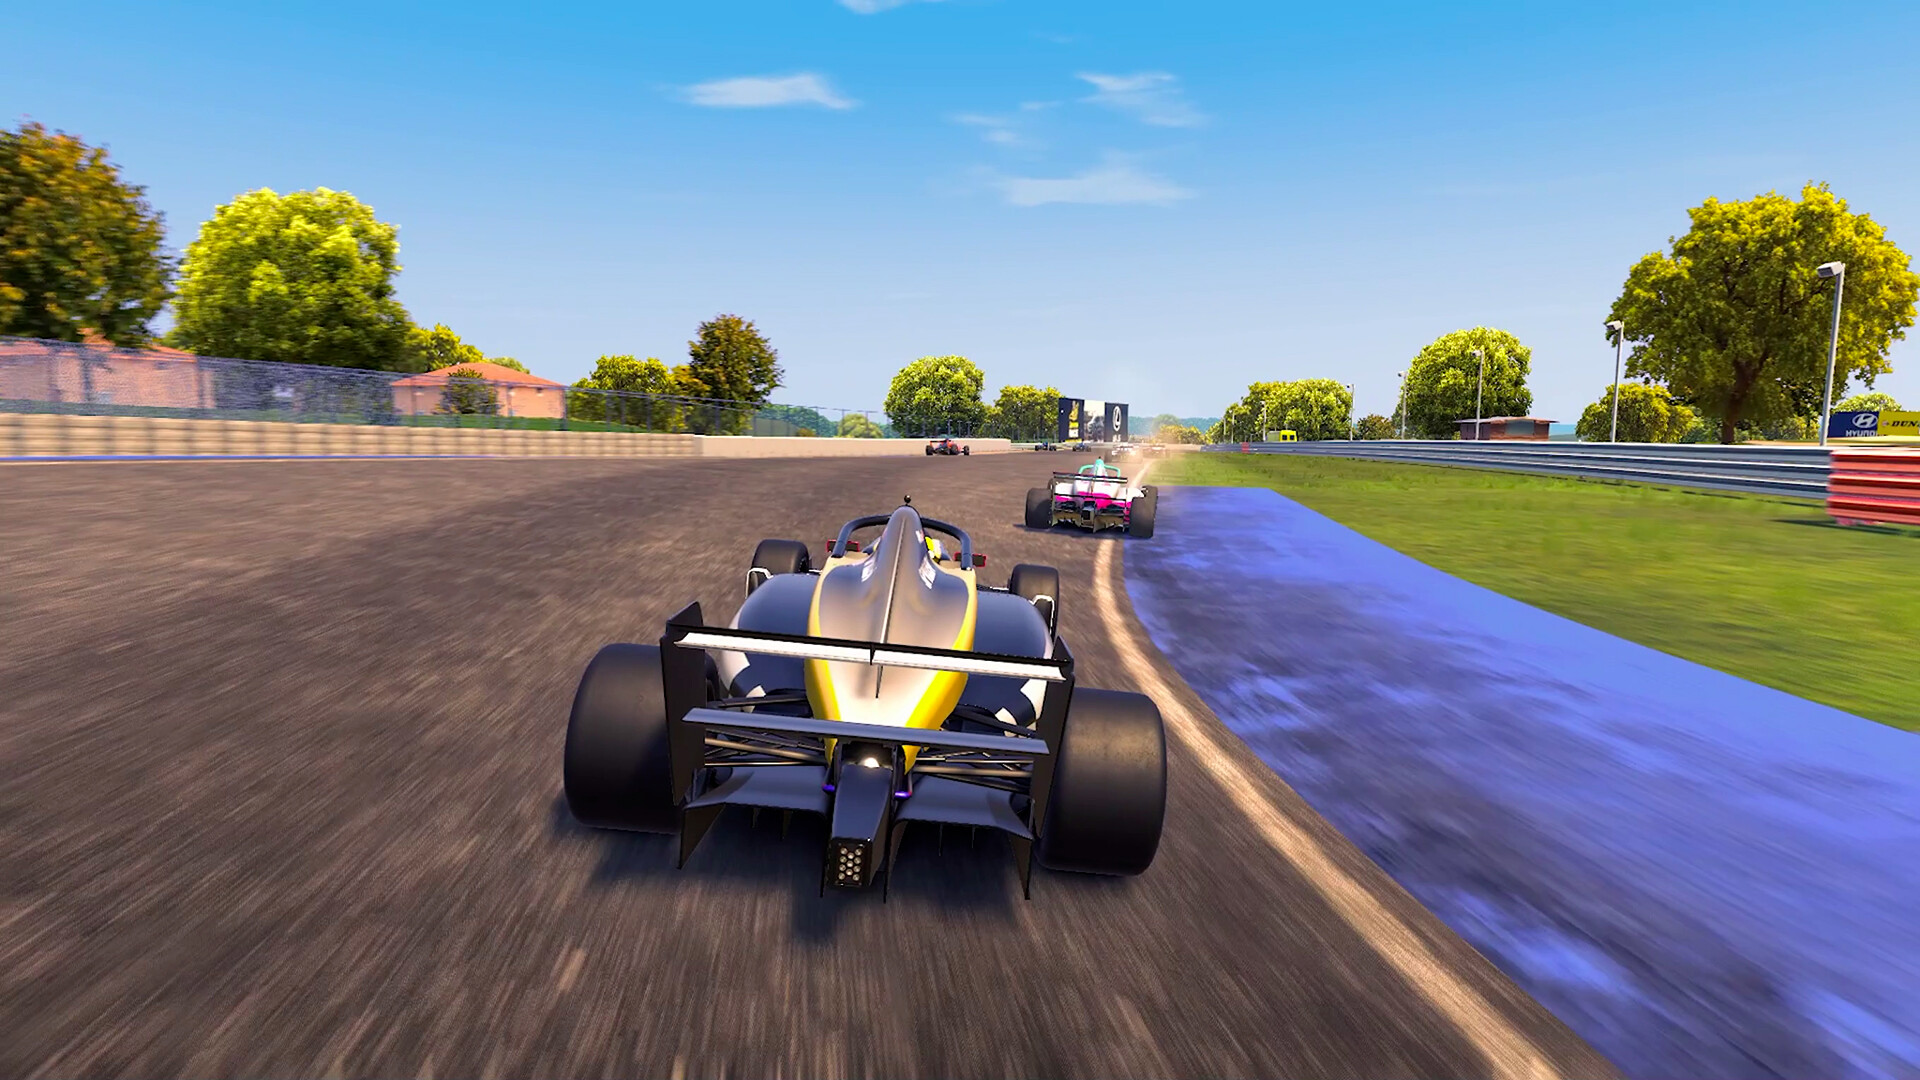 JVMag – Hot Lap Racing, the perfect racing game for Switch